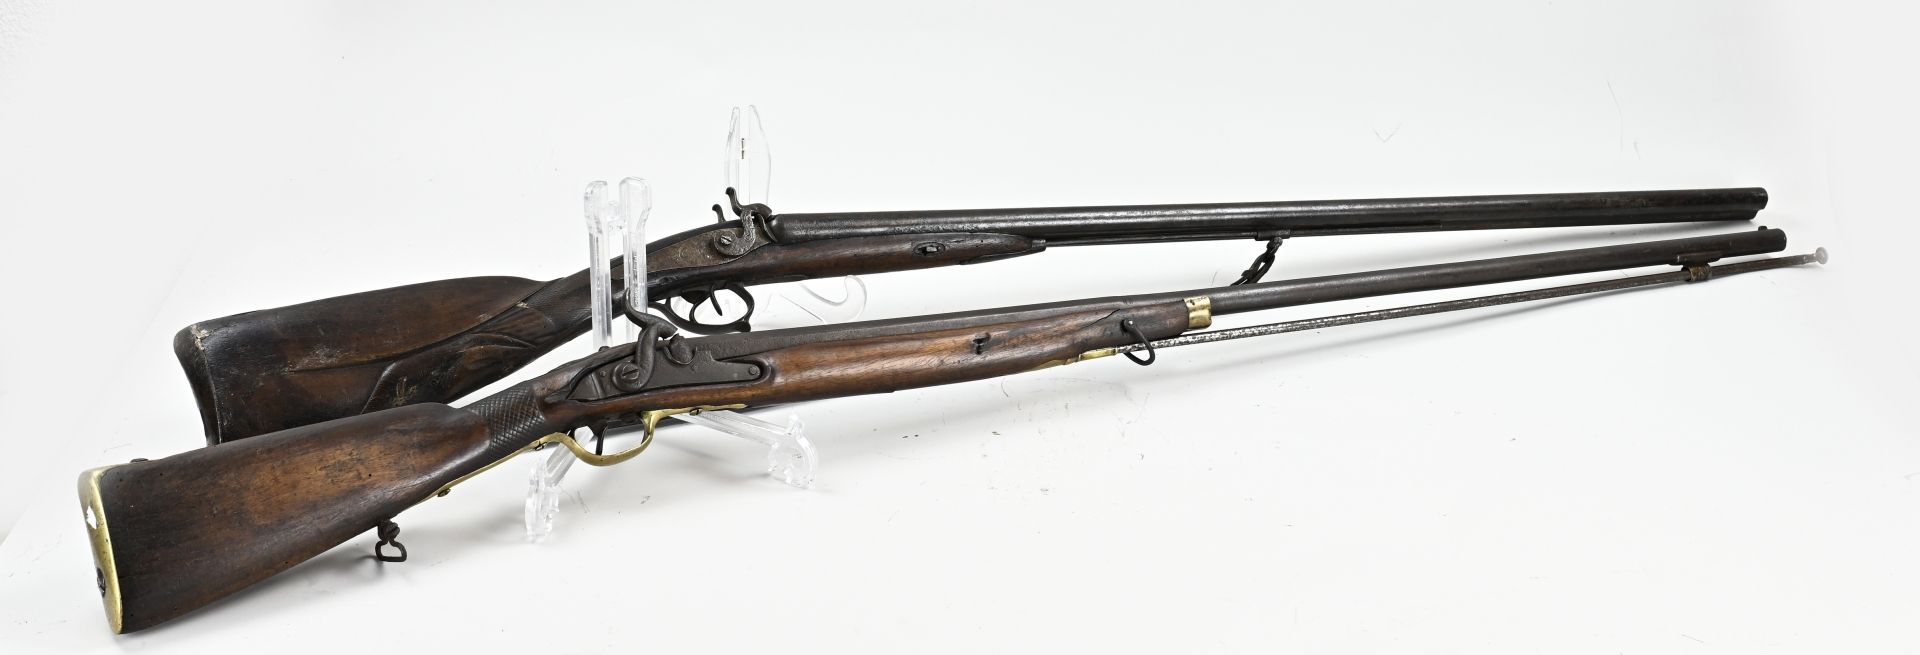 Two antique guns - Image 2 of 2